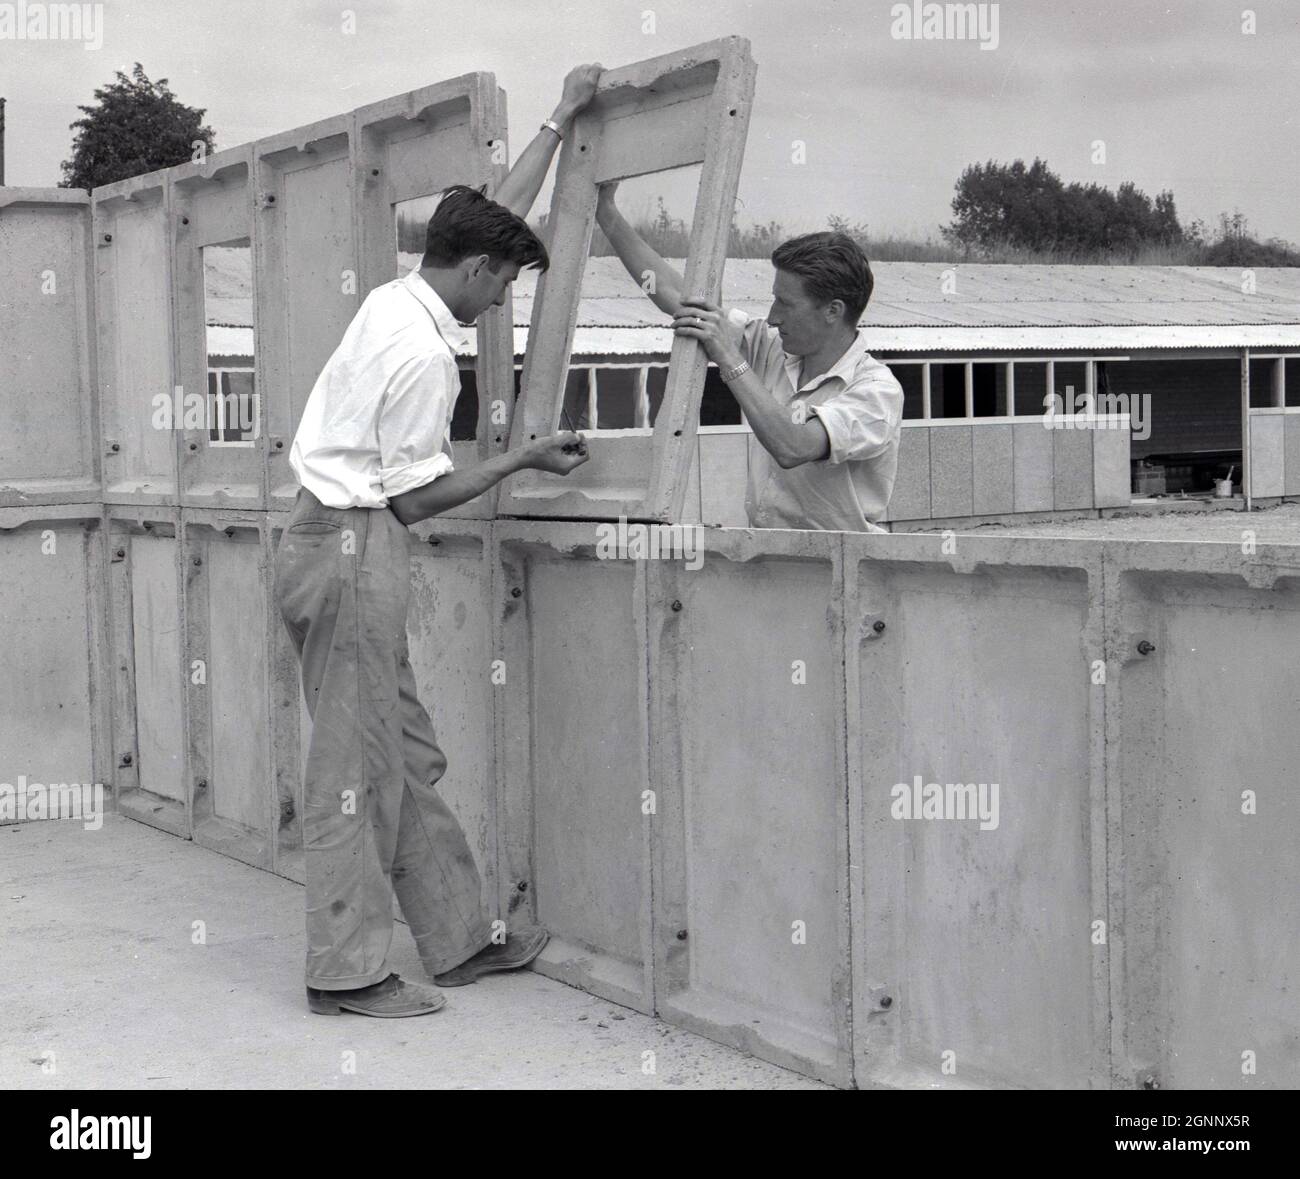 1960s, historical, constructing a prefab garage on an industrial premises at Witney, Oxford, England, UK, for demonstration purposes, Two workers fixing or bolting the upper level precast concrete panels in position. Stock Photo